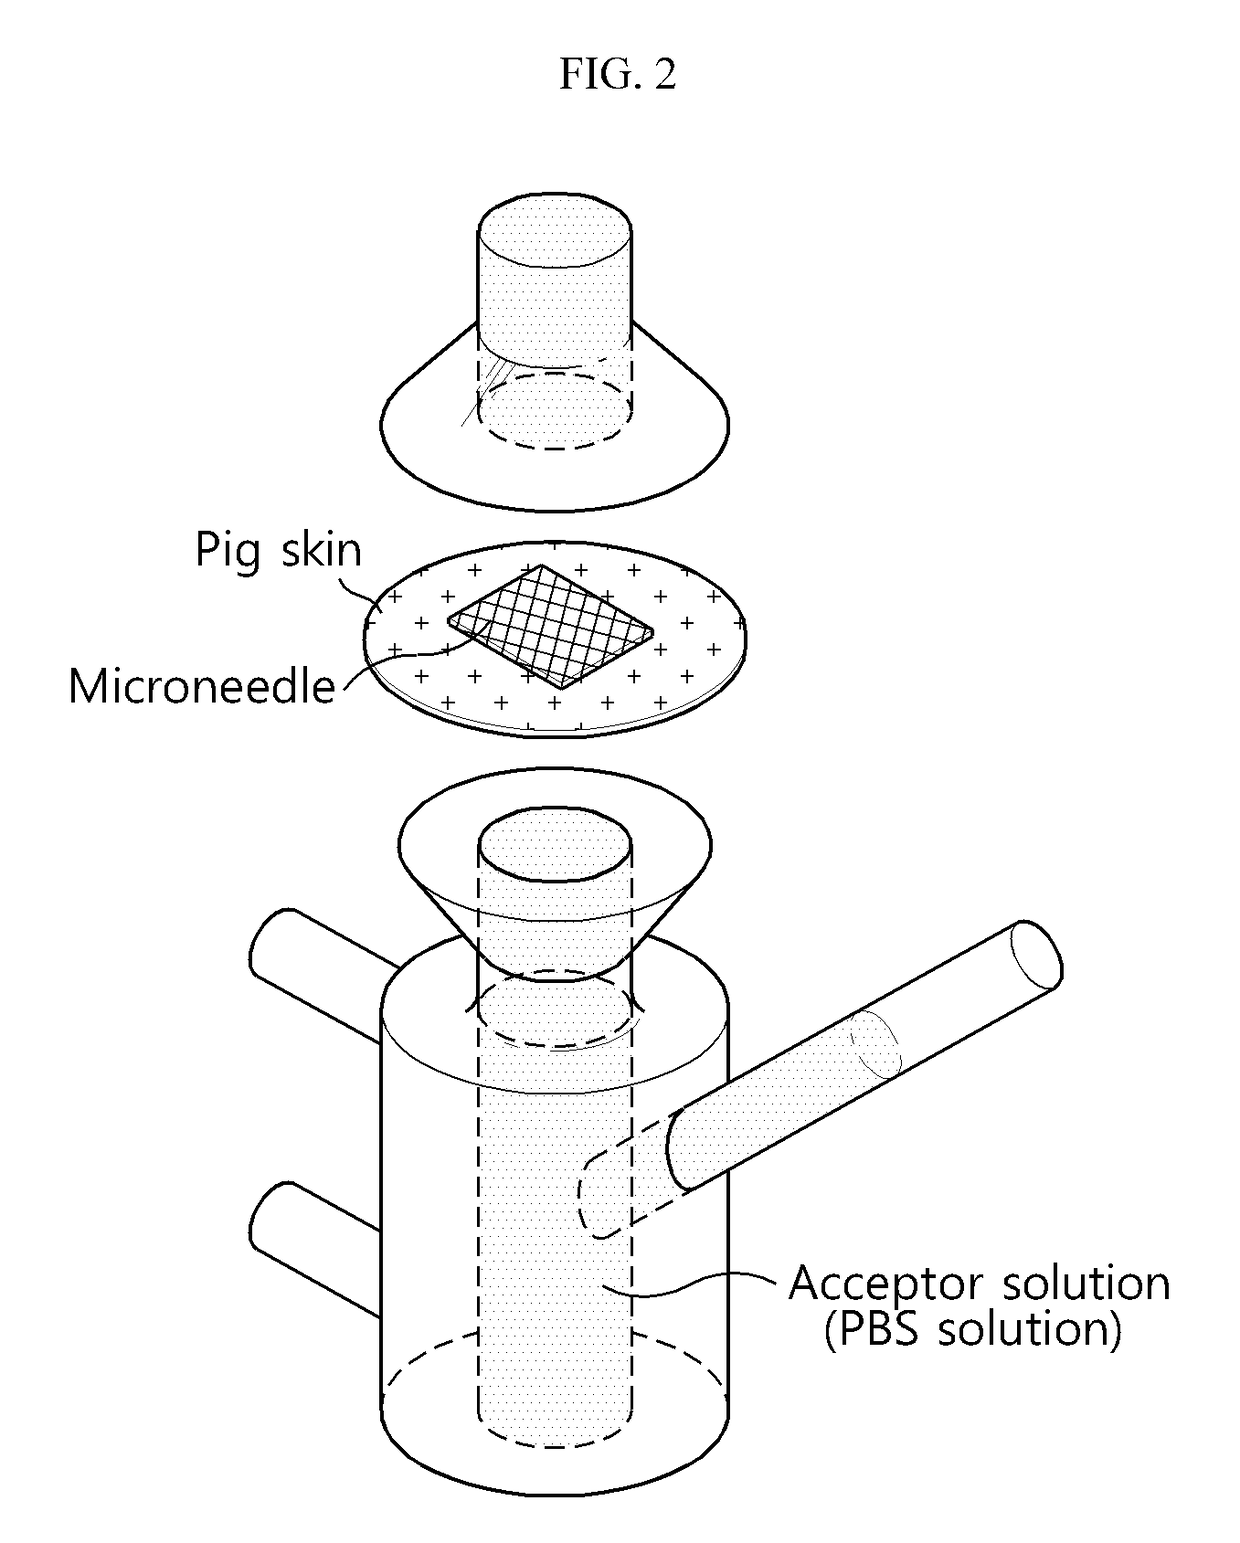 Soluble microneedle for delivering proteins or peptides